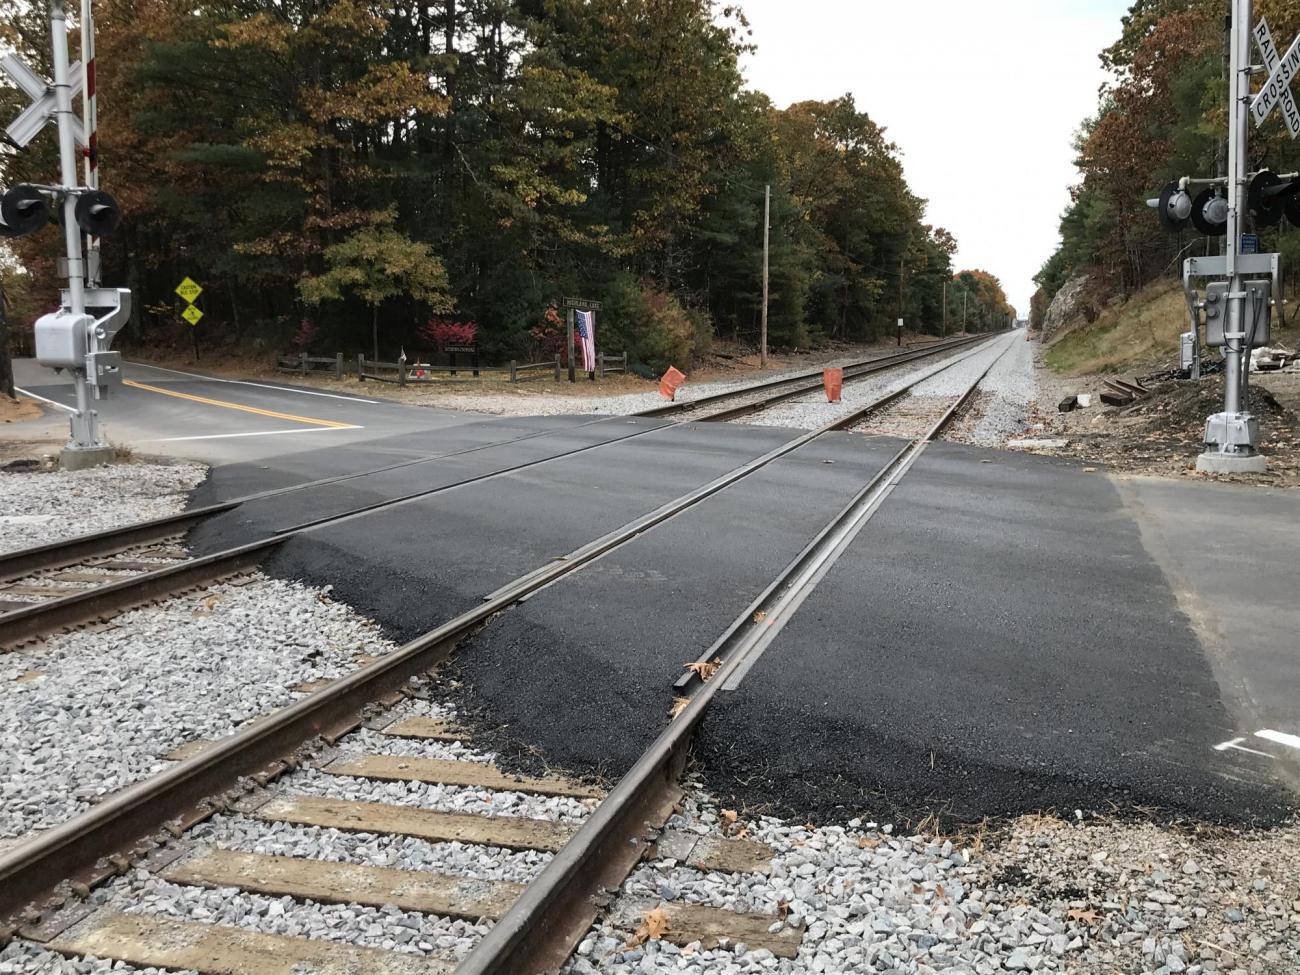 The two track crossing at Seekonk Street in Norfolk was completed in October 2019